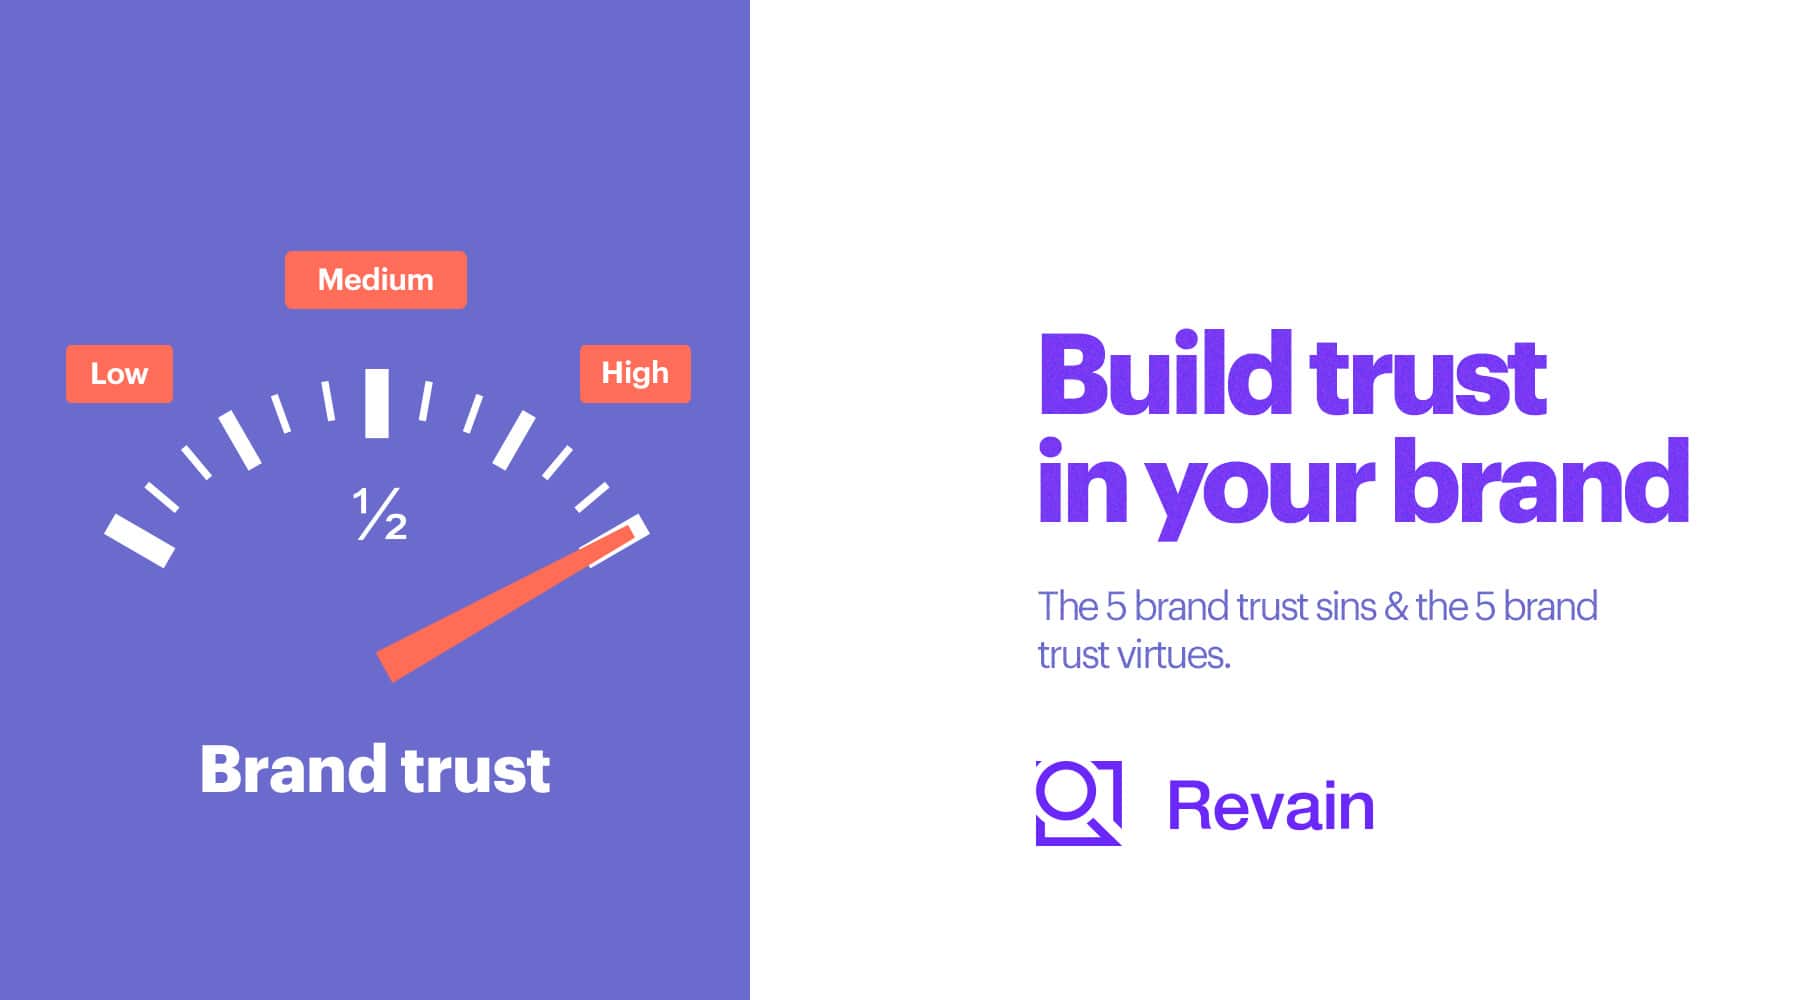 Build trust in your brand: 5 sins and 5 virues